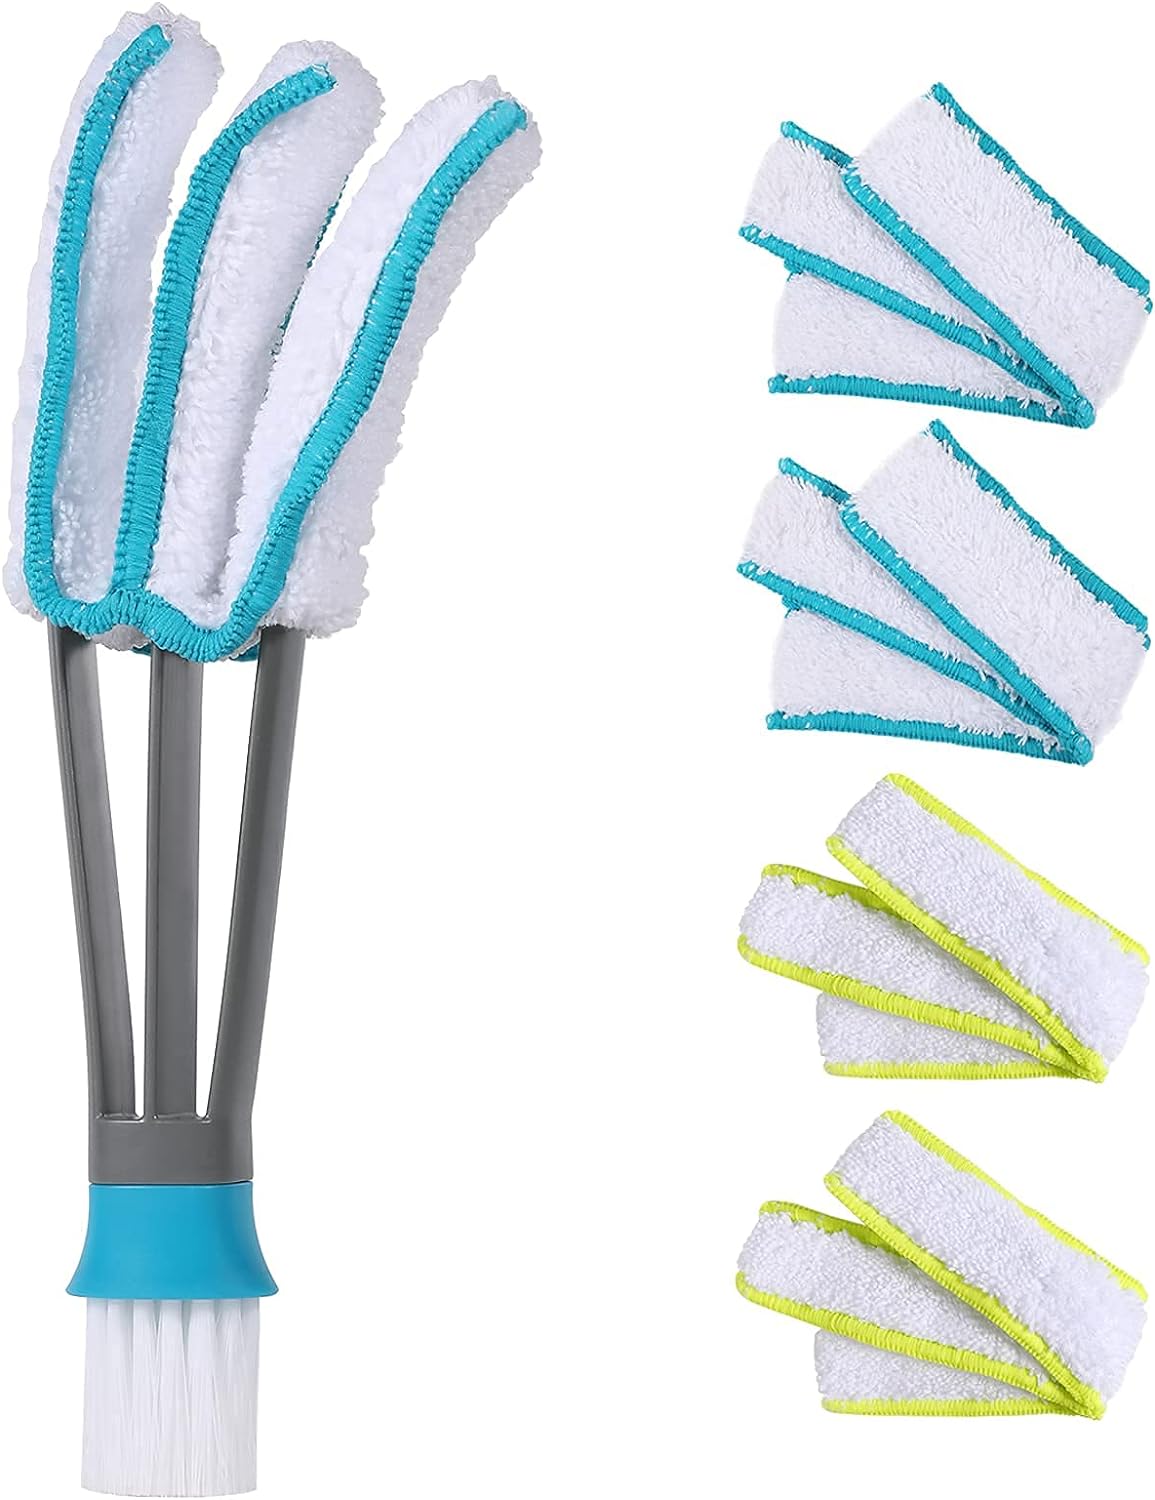 SetSail Blind Duster, Window Blind Cleaner Duster Brush with 4 Microfiber Sleeves Blind Cleaning Tools for Vertical Blinds Air Conditioner Jalousie Dust Ceiling Fans Car Vents Jalousie Dust Collector